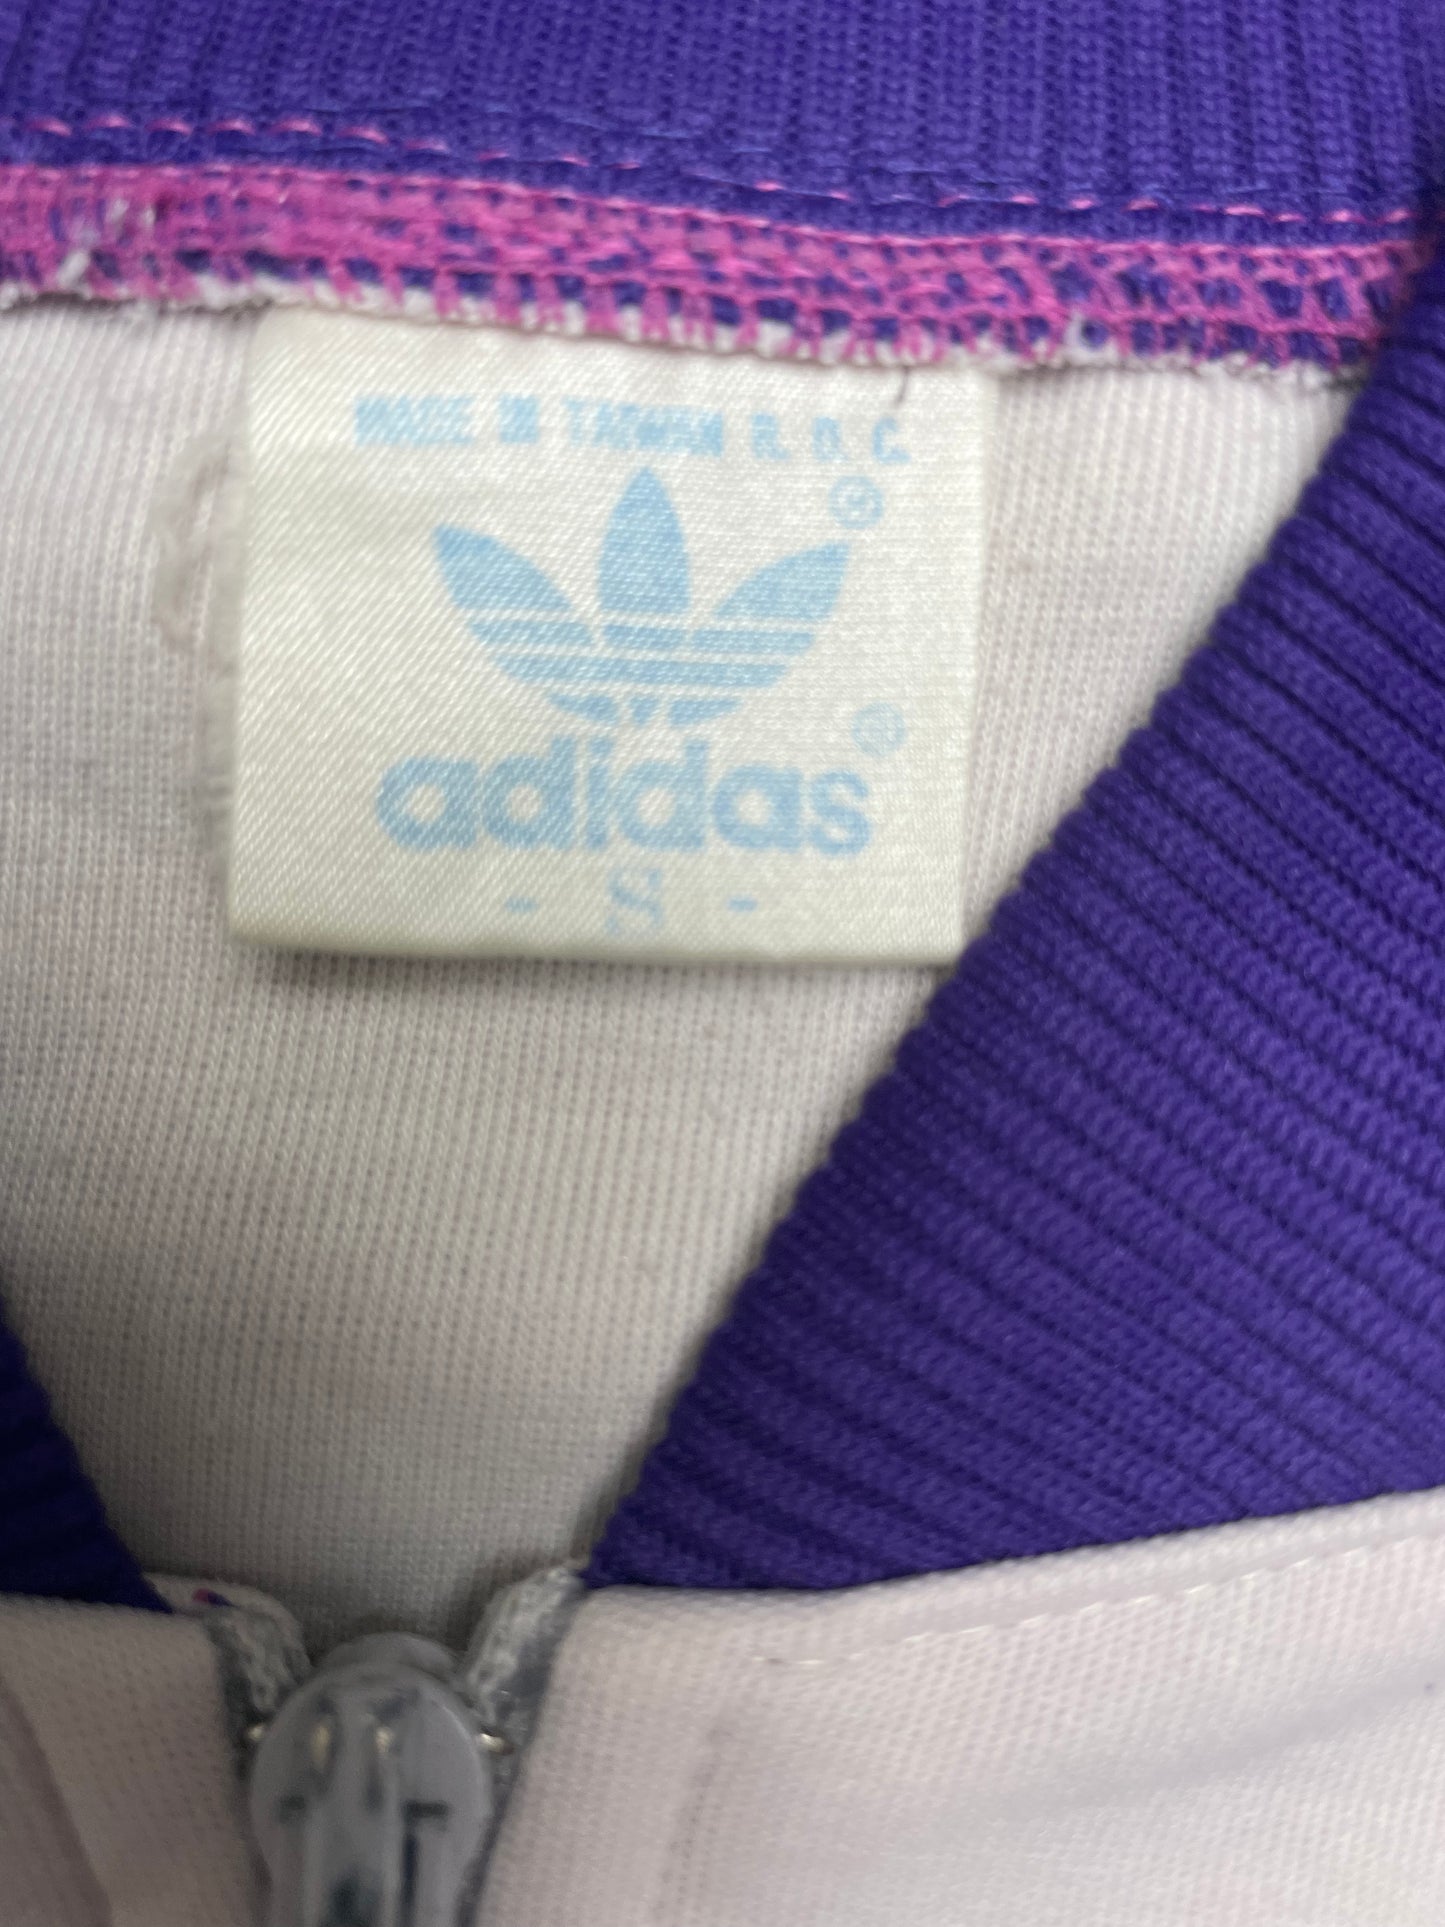 Vintage 80s Purple Adidas Track Jacket Made in Taiwan Small